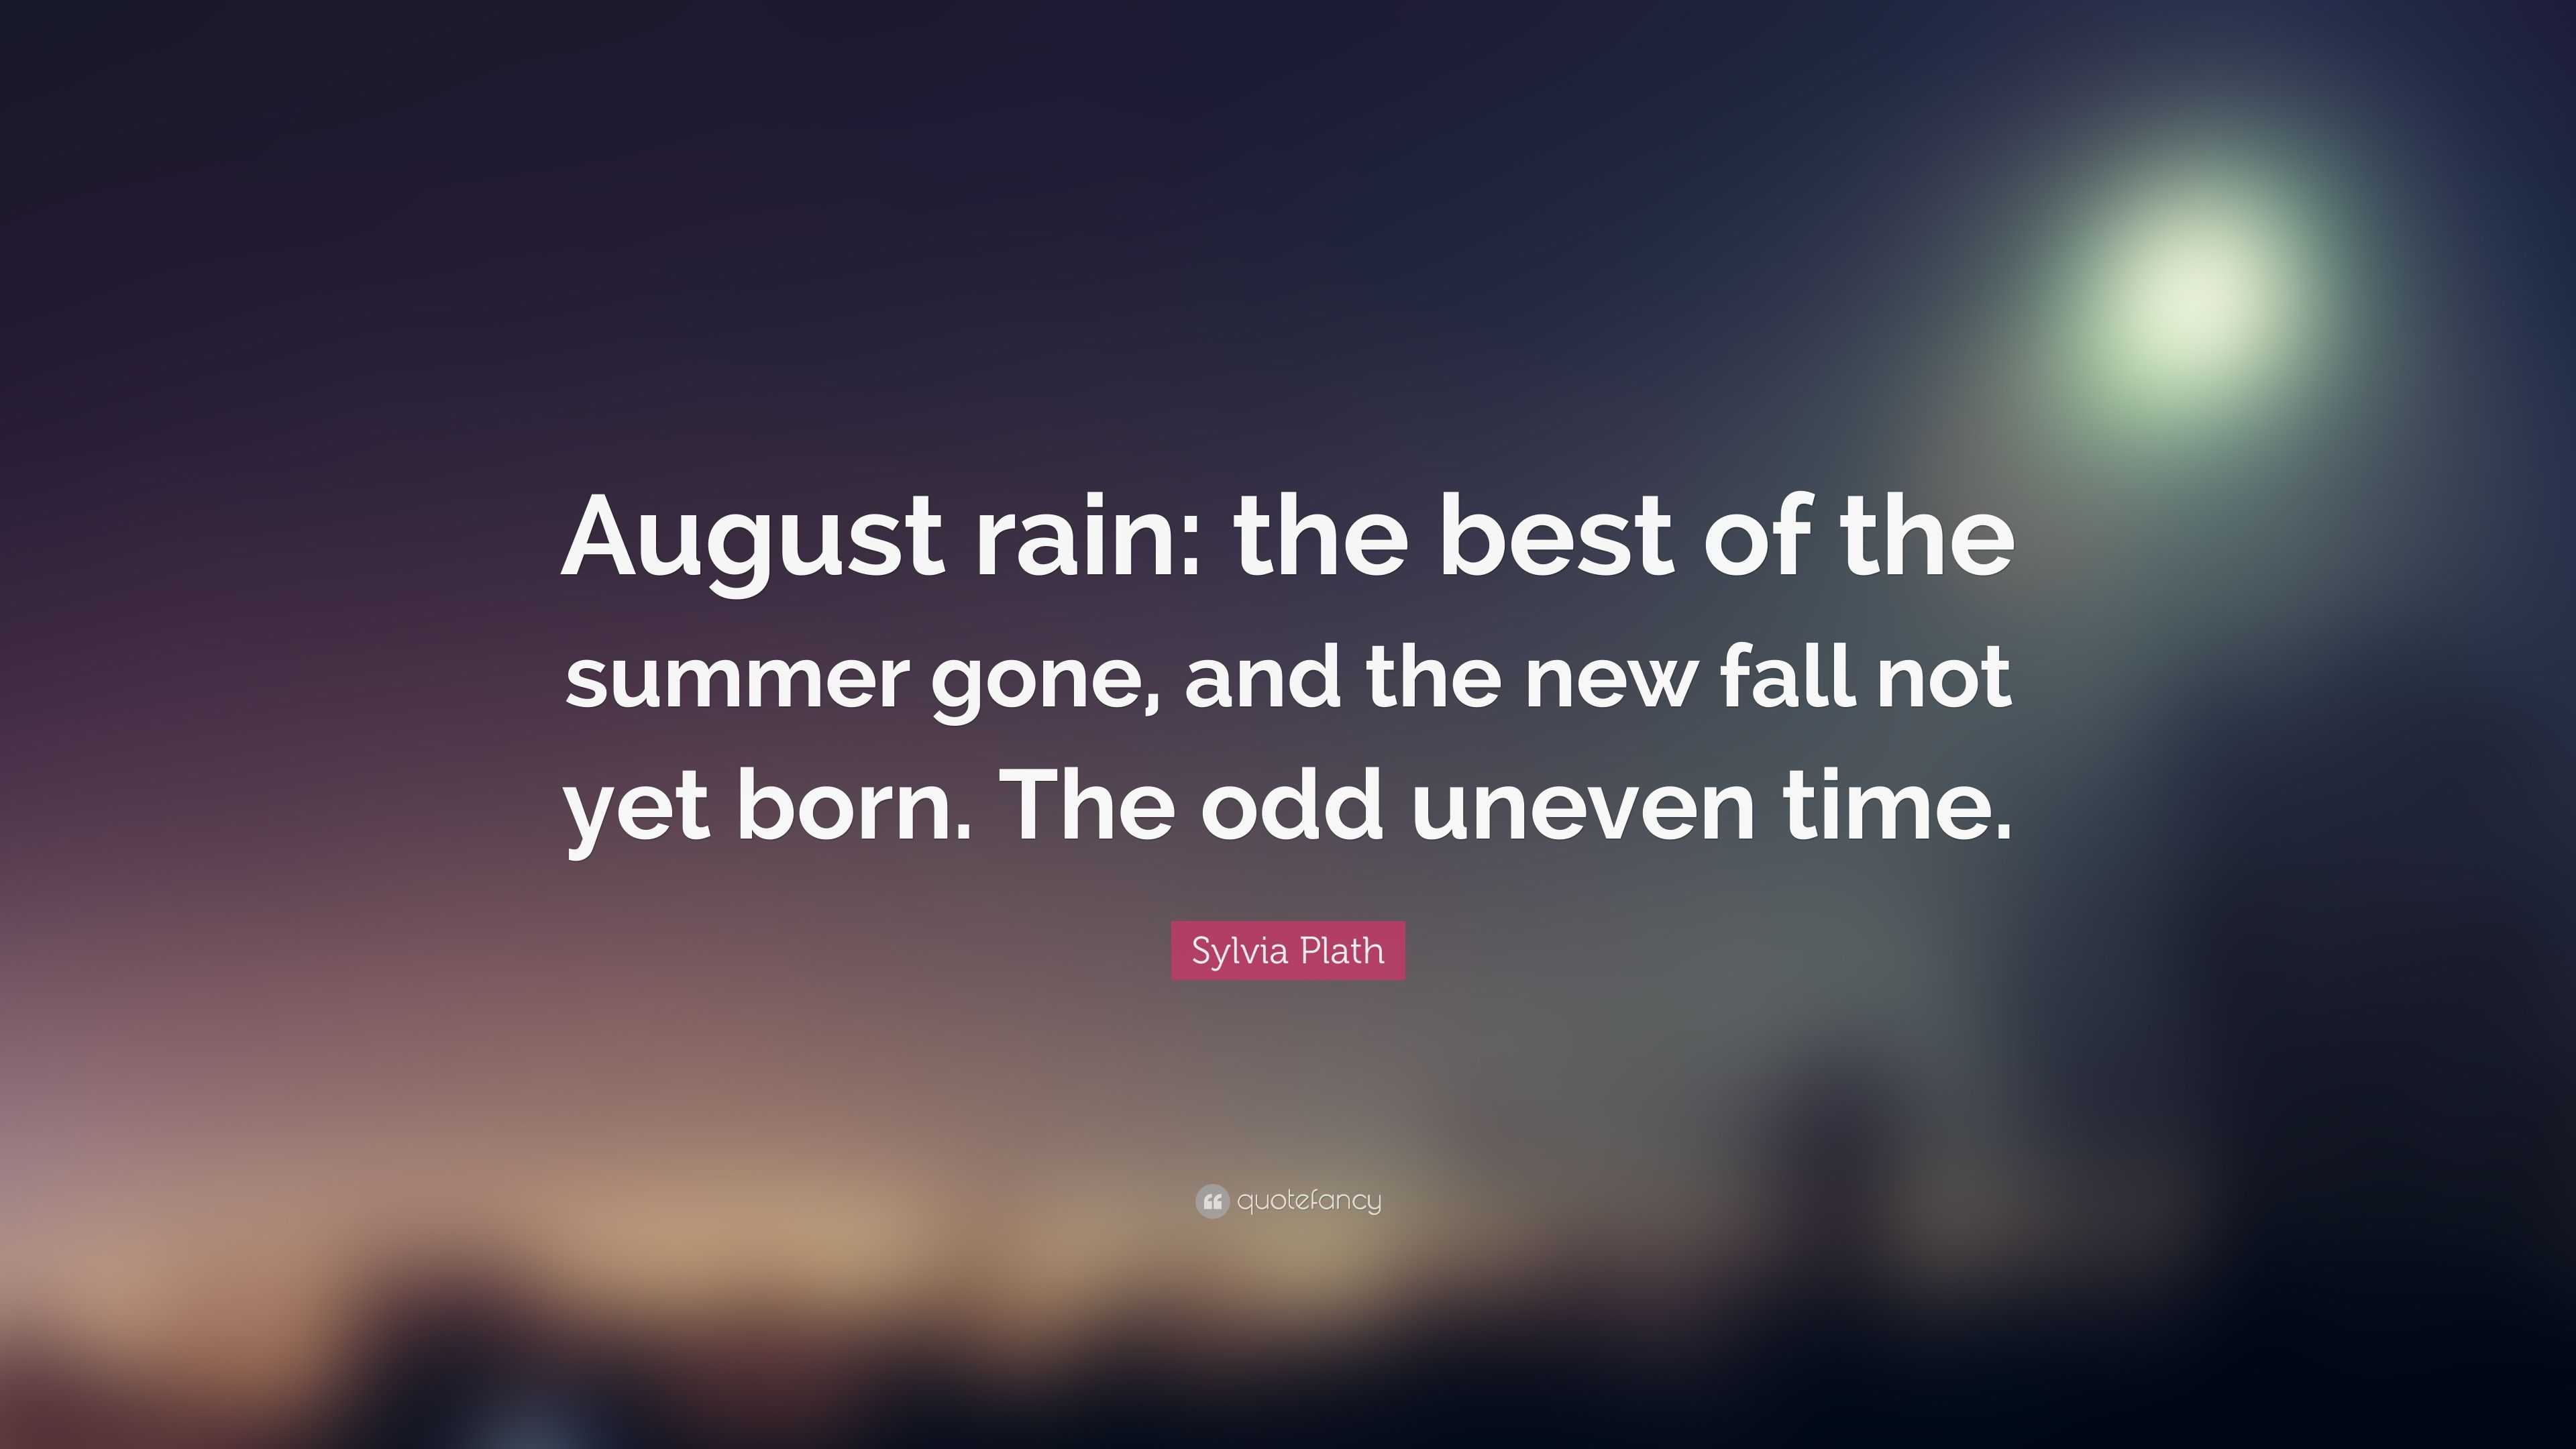 Sylvia Plath Quote: “August rain: the best of the summer gone, and the new  fall not